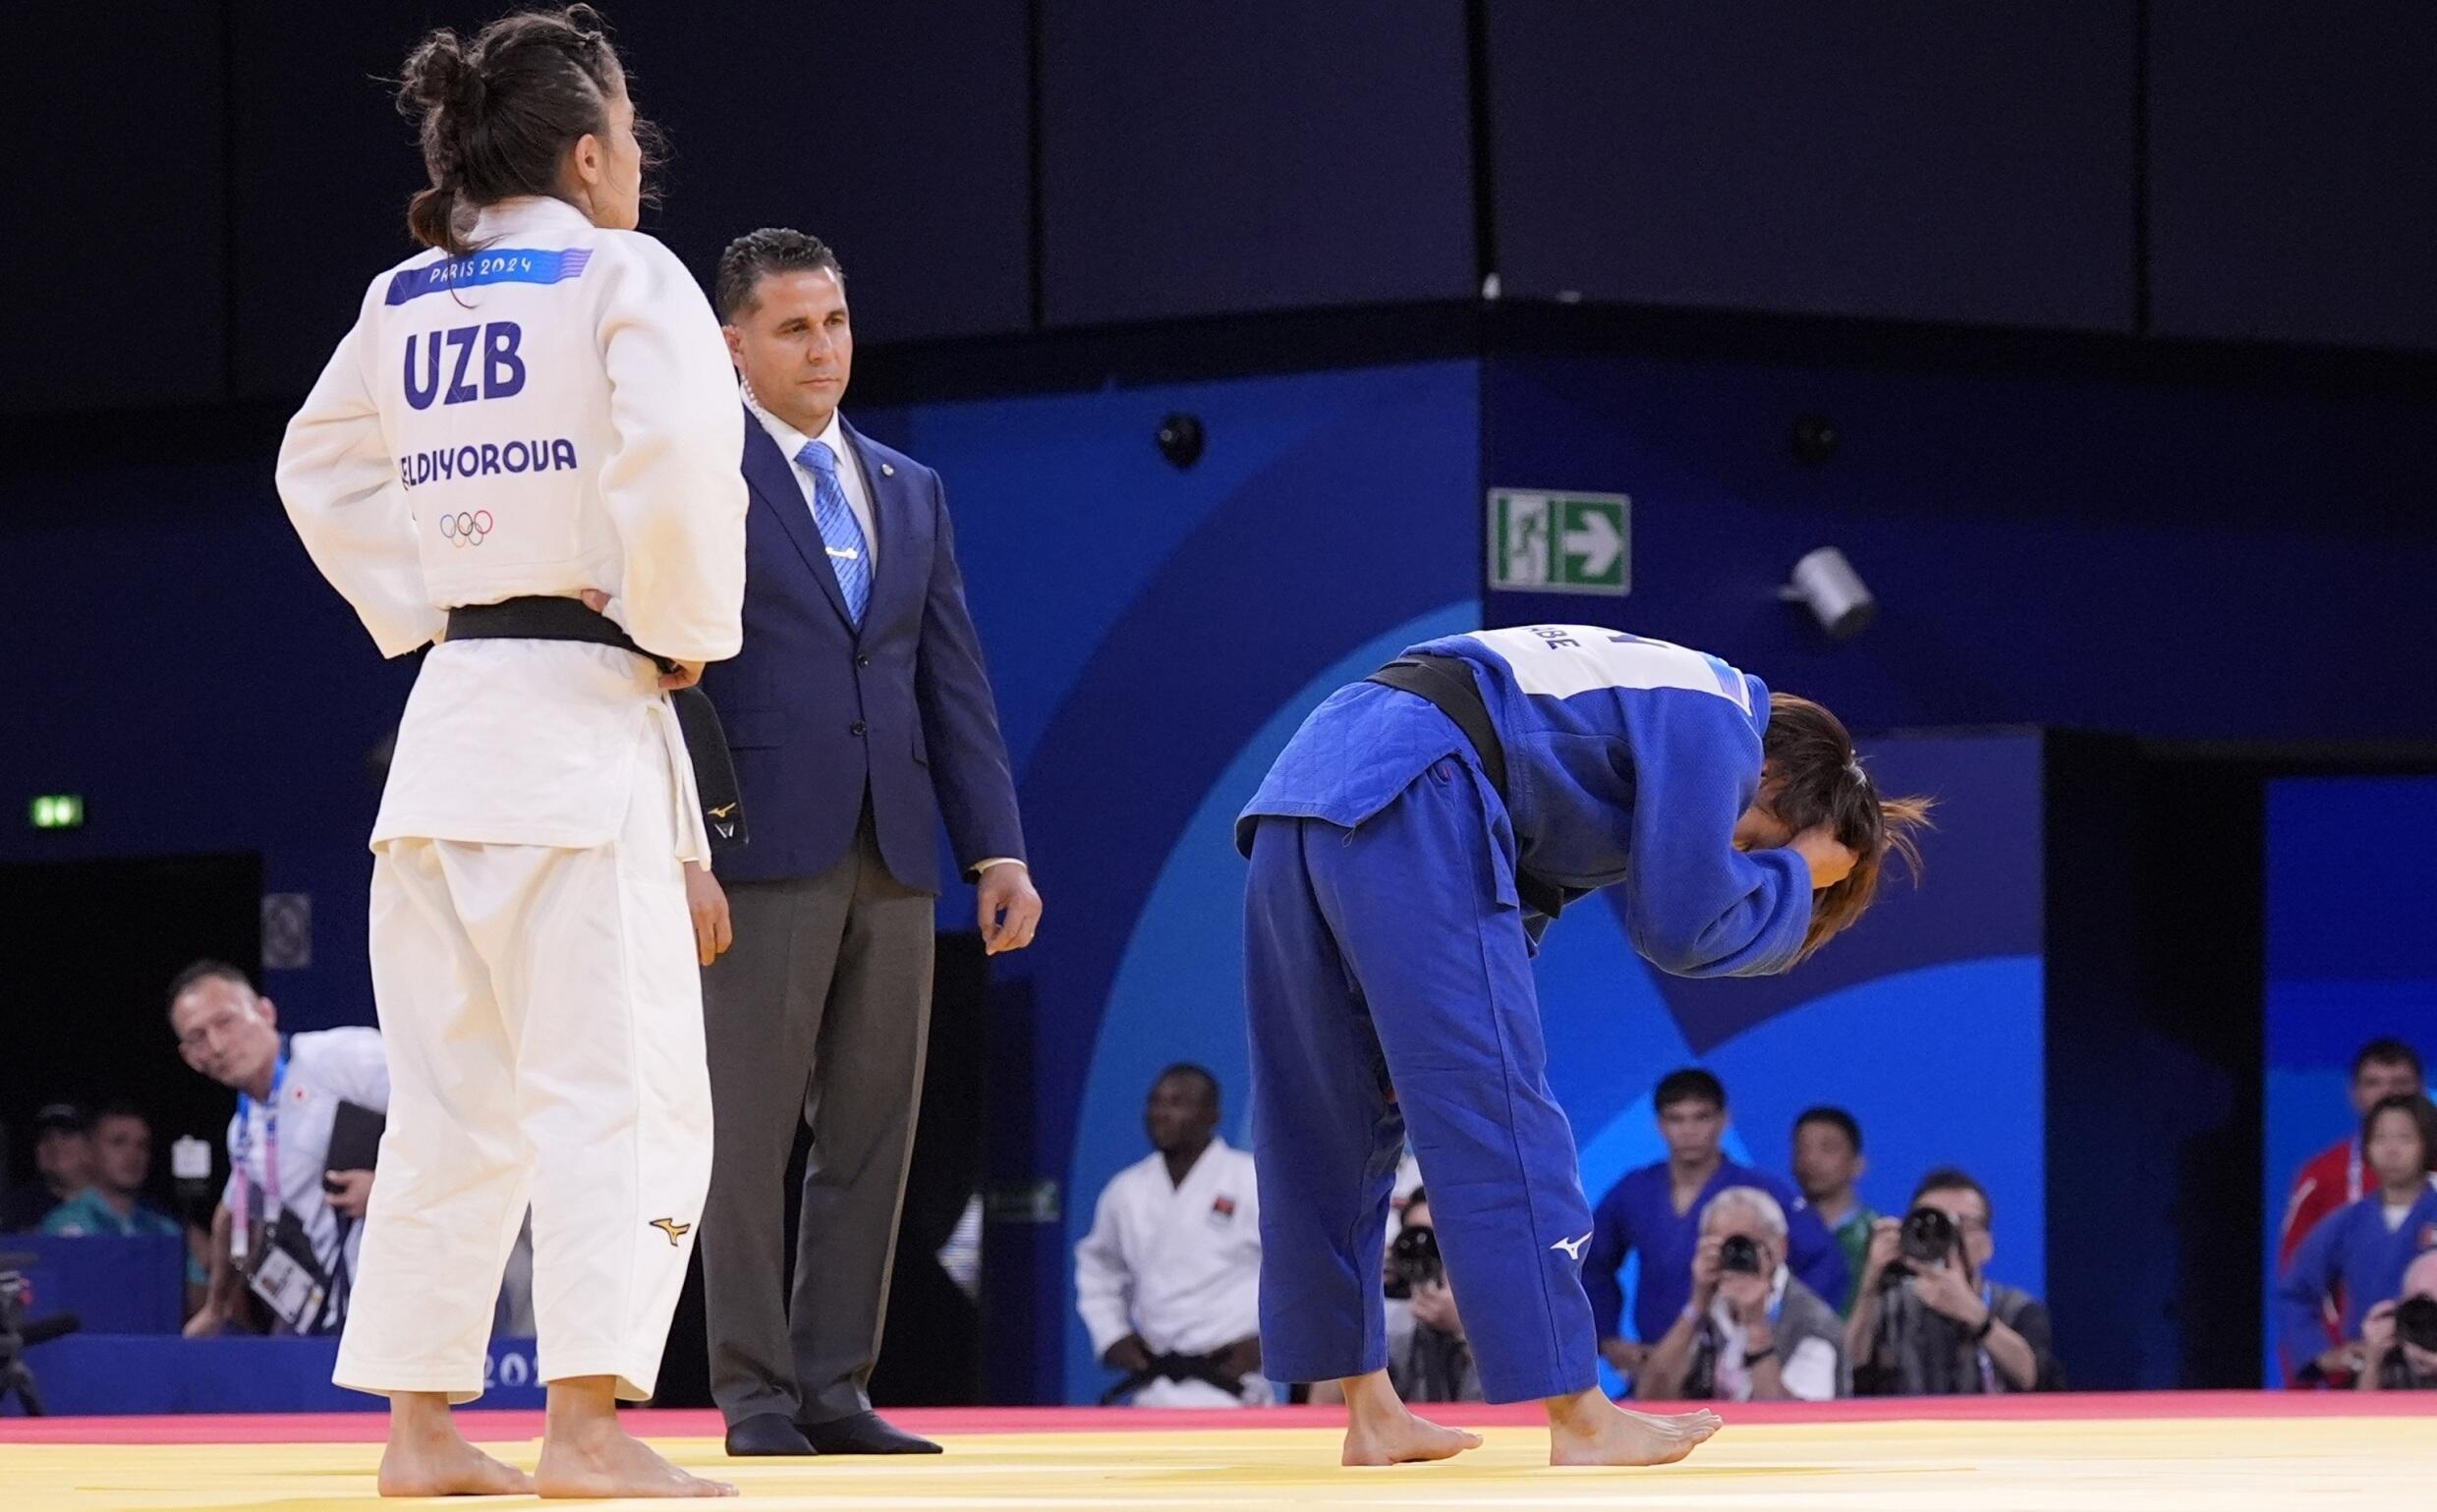 Japan's Uta Abe (in blue) was undefeated since 2019 before her round of 16 loss at the Paris Games to Uzbekistan's Diyora Keldiyorova.